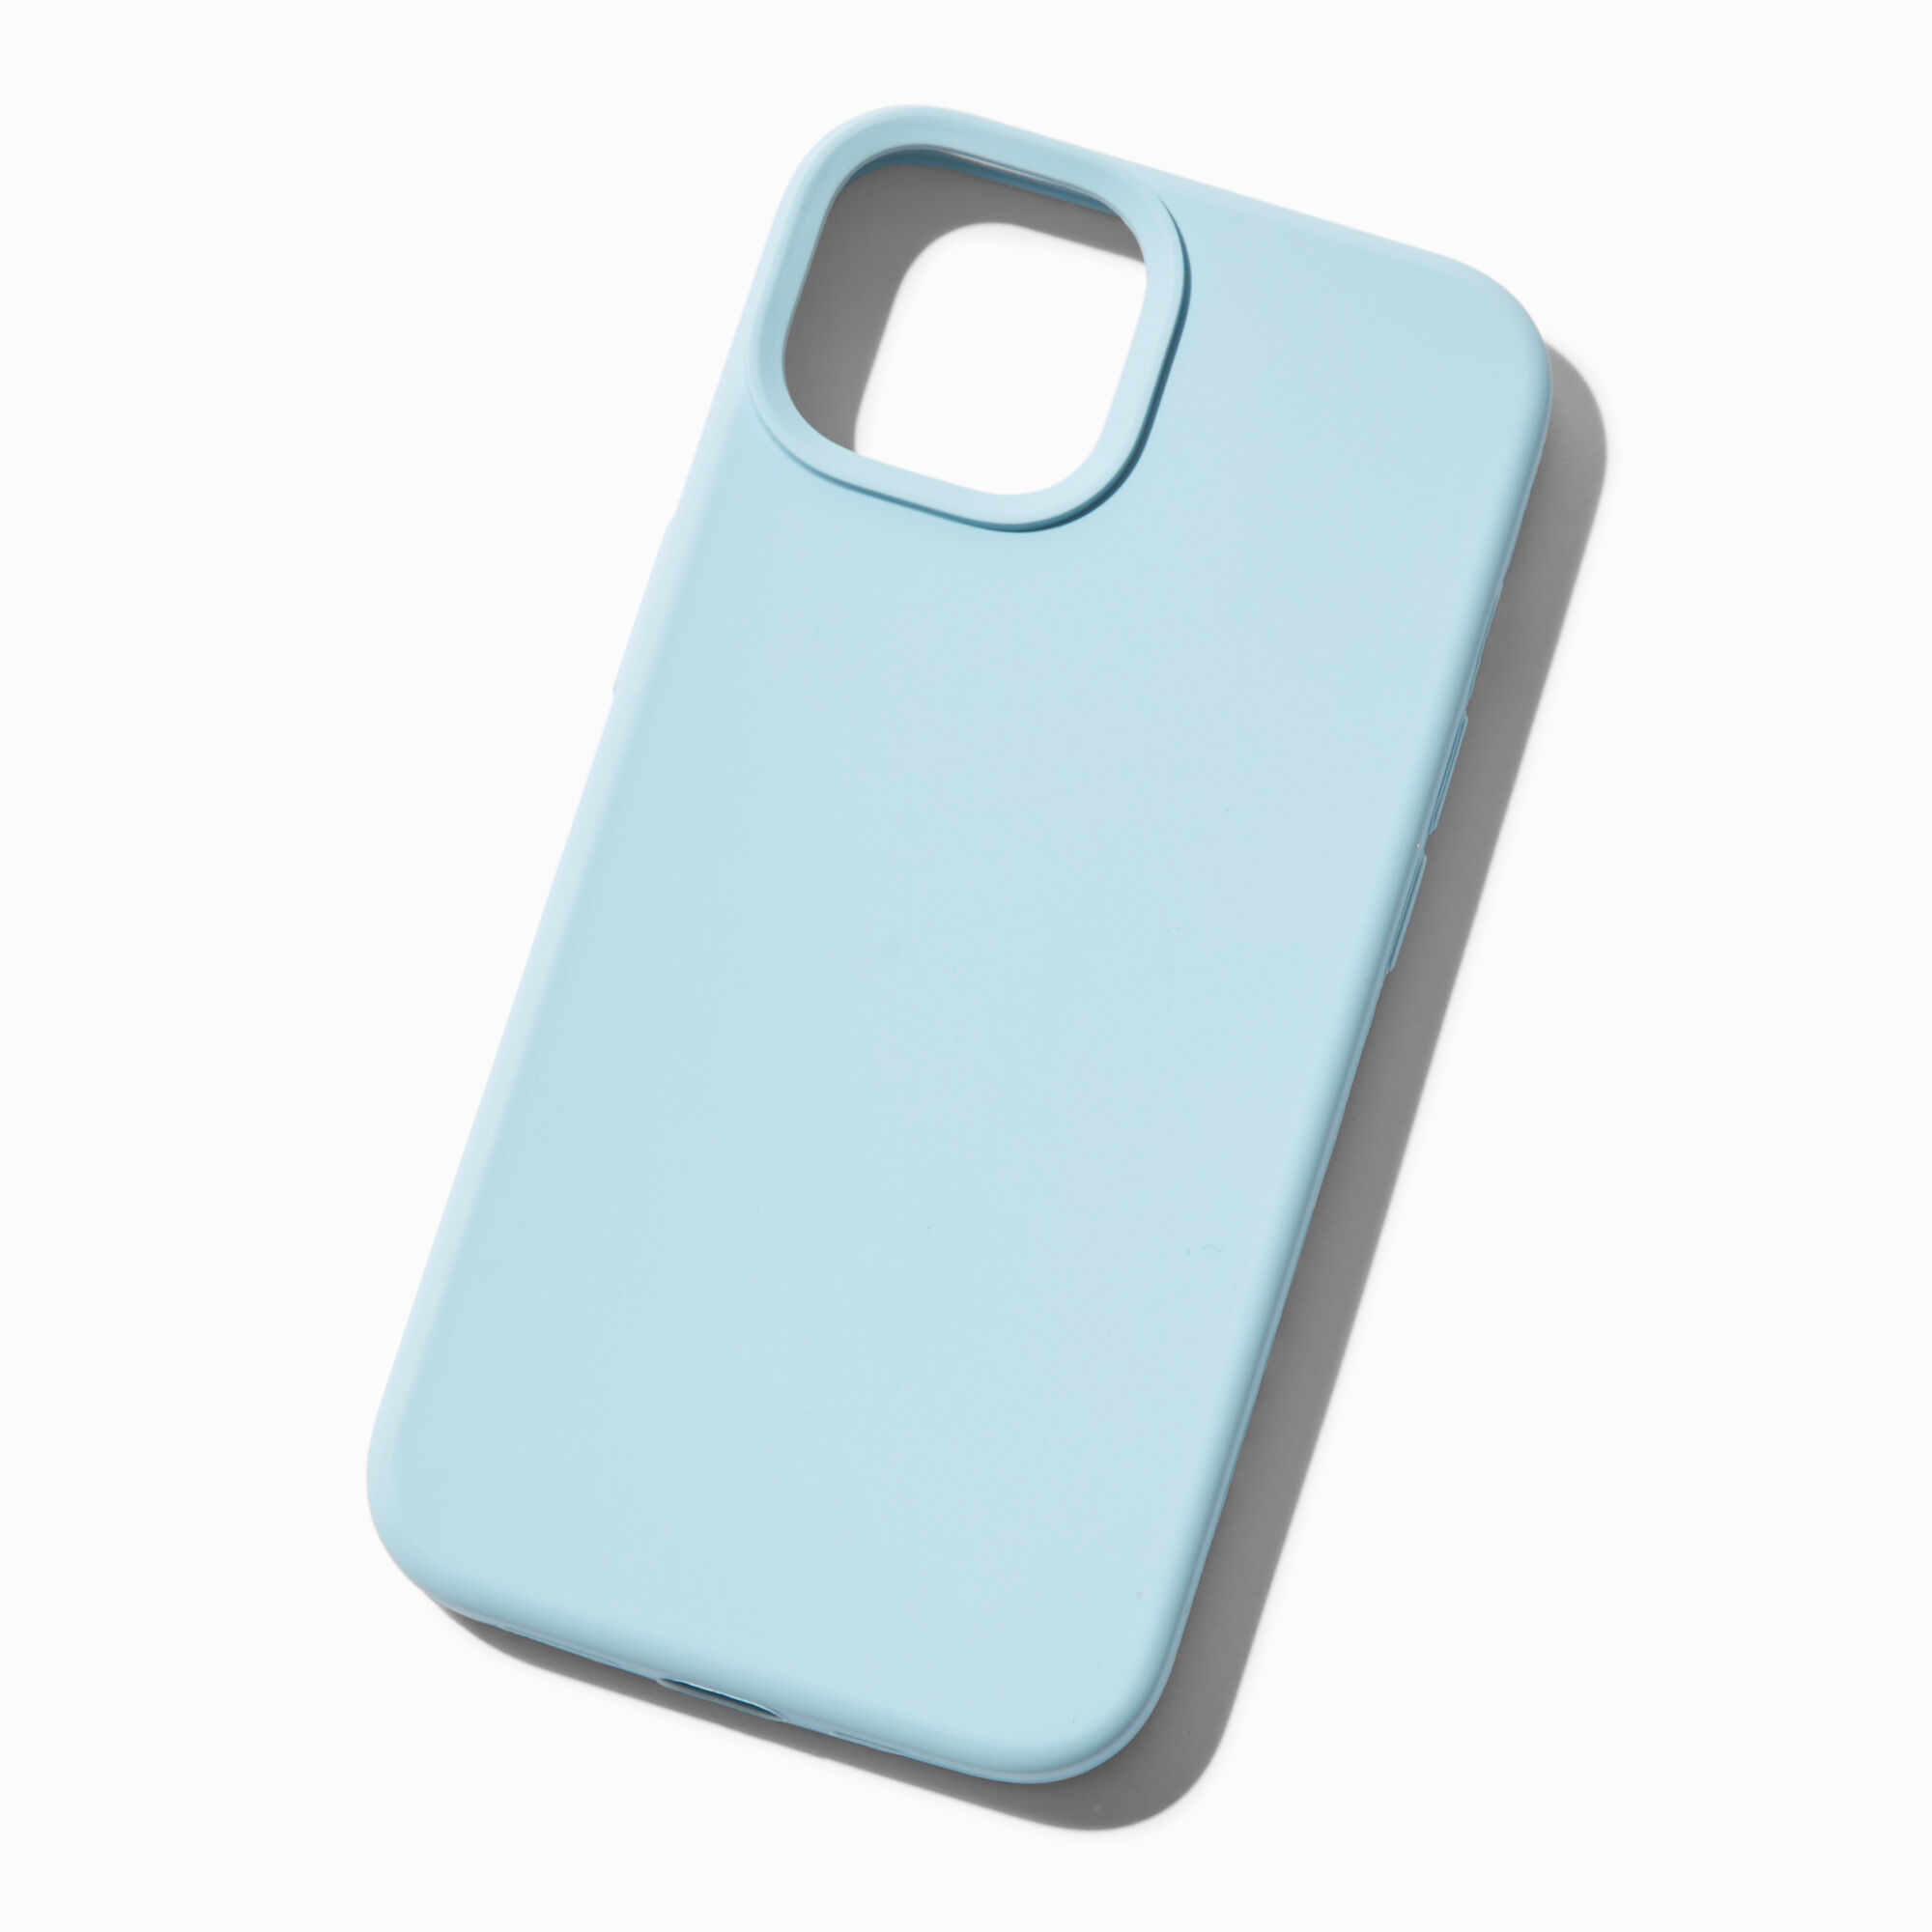 View Claires Solid Silicone Phone Case Fits Iphone 131415 Pro Baby Blue information